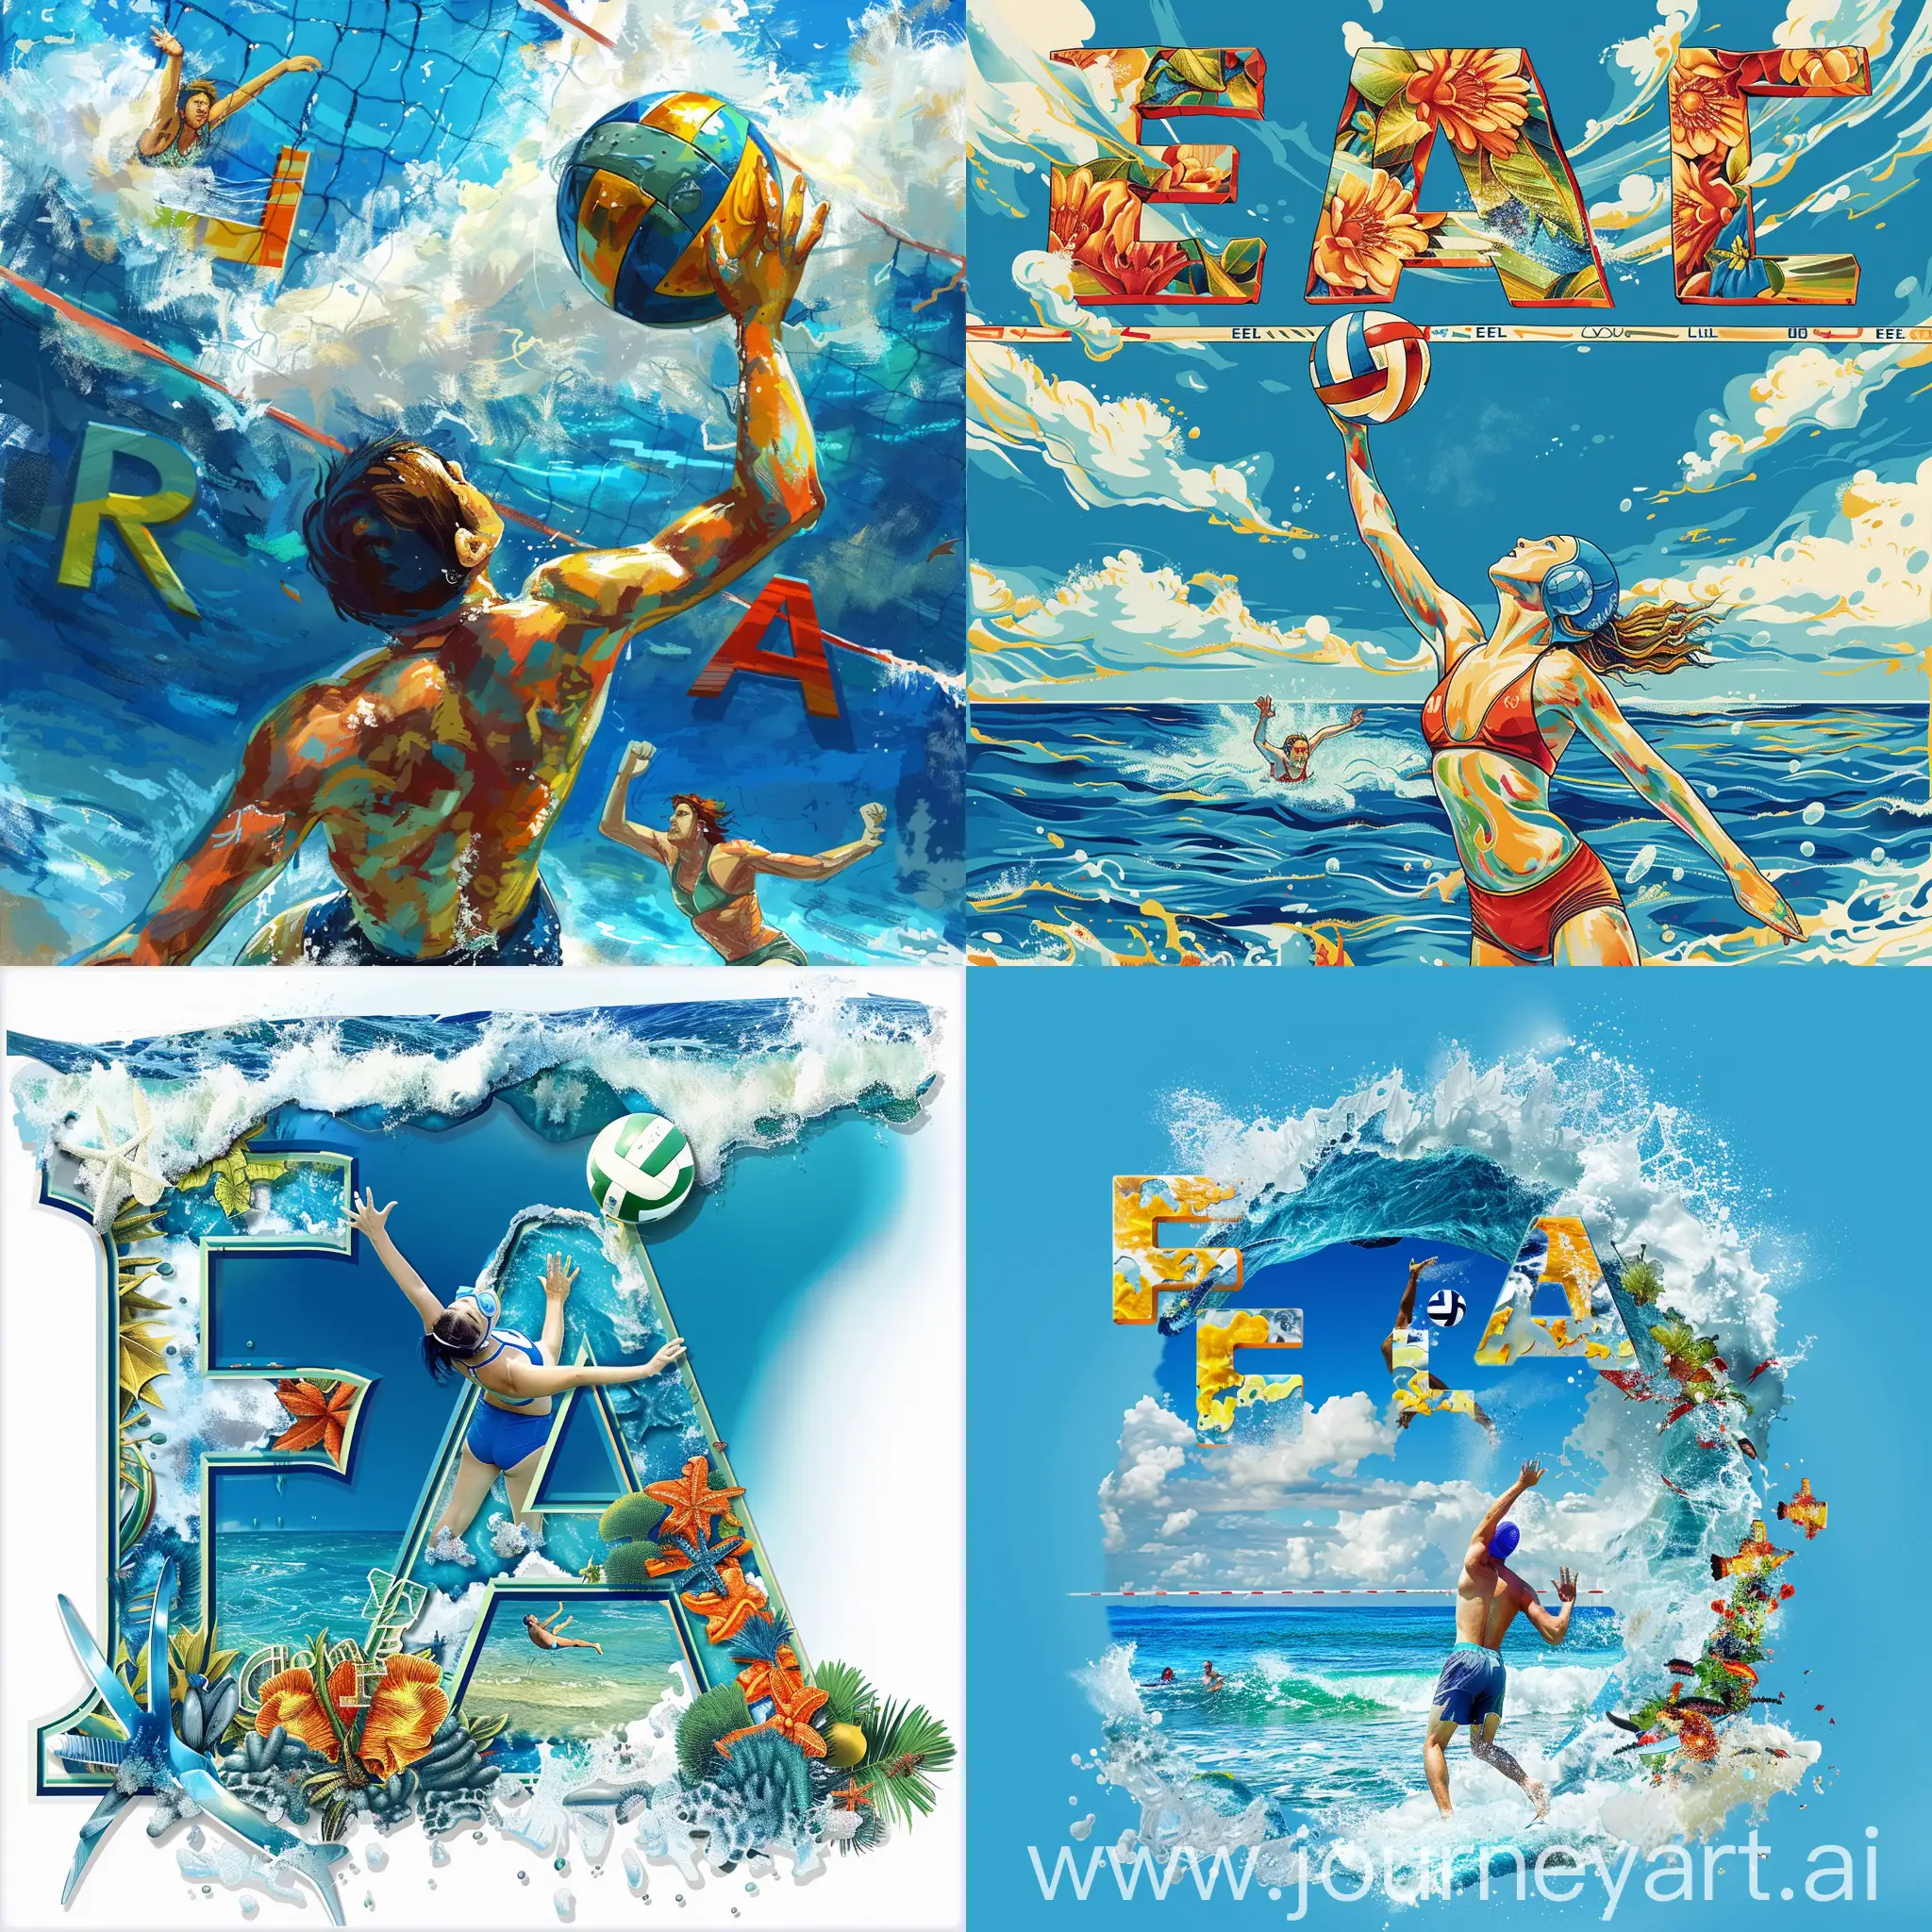 Use the letter E,L, E, A, N, O, R in a picture, include a swimmer and a volleyball. Include the ocean